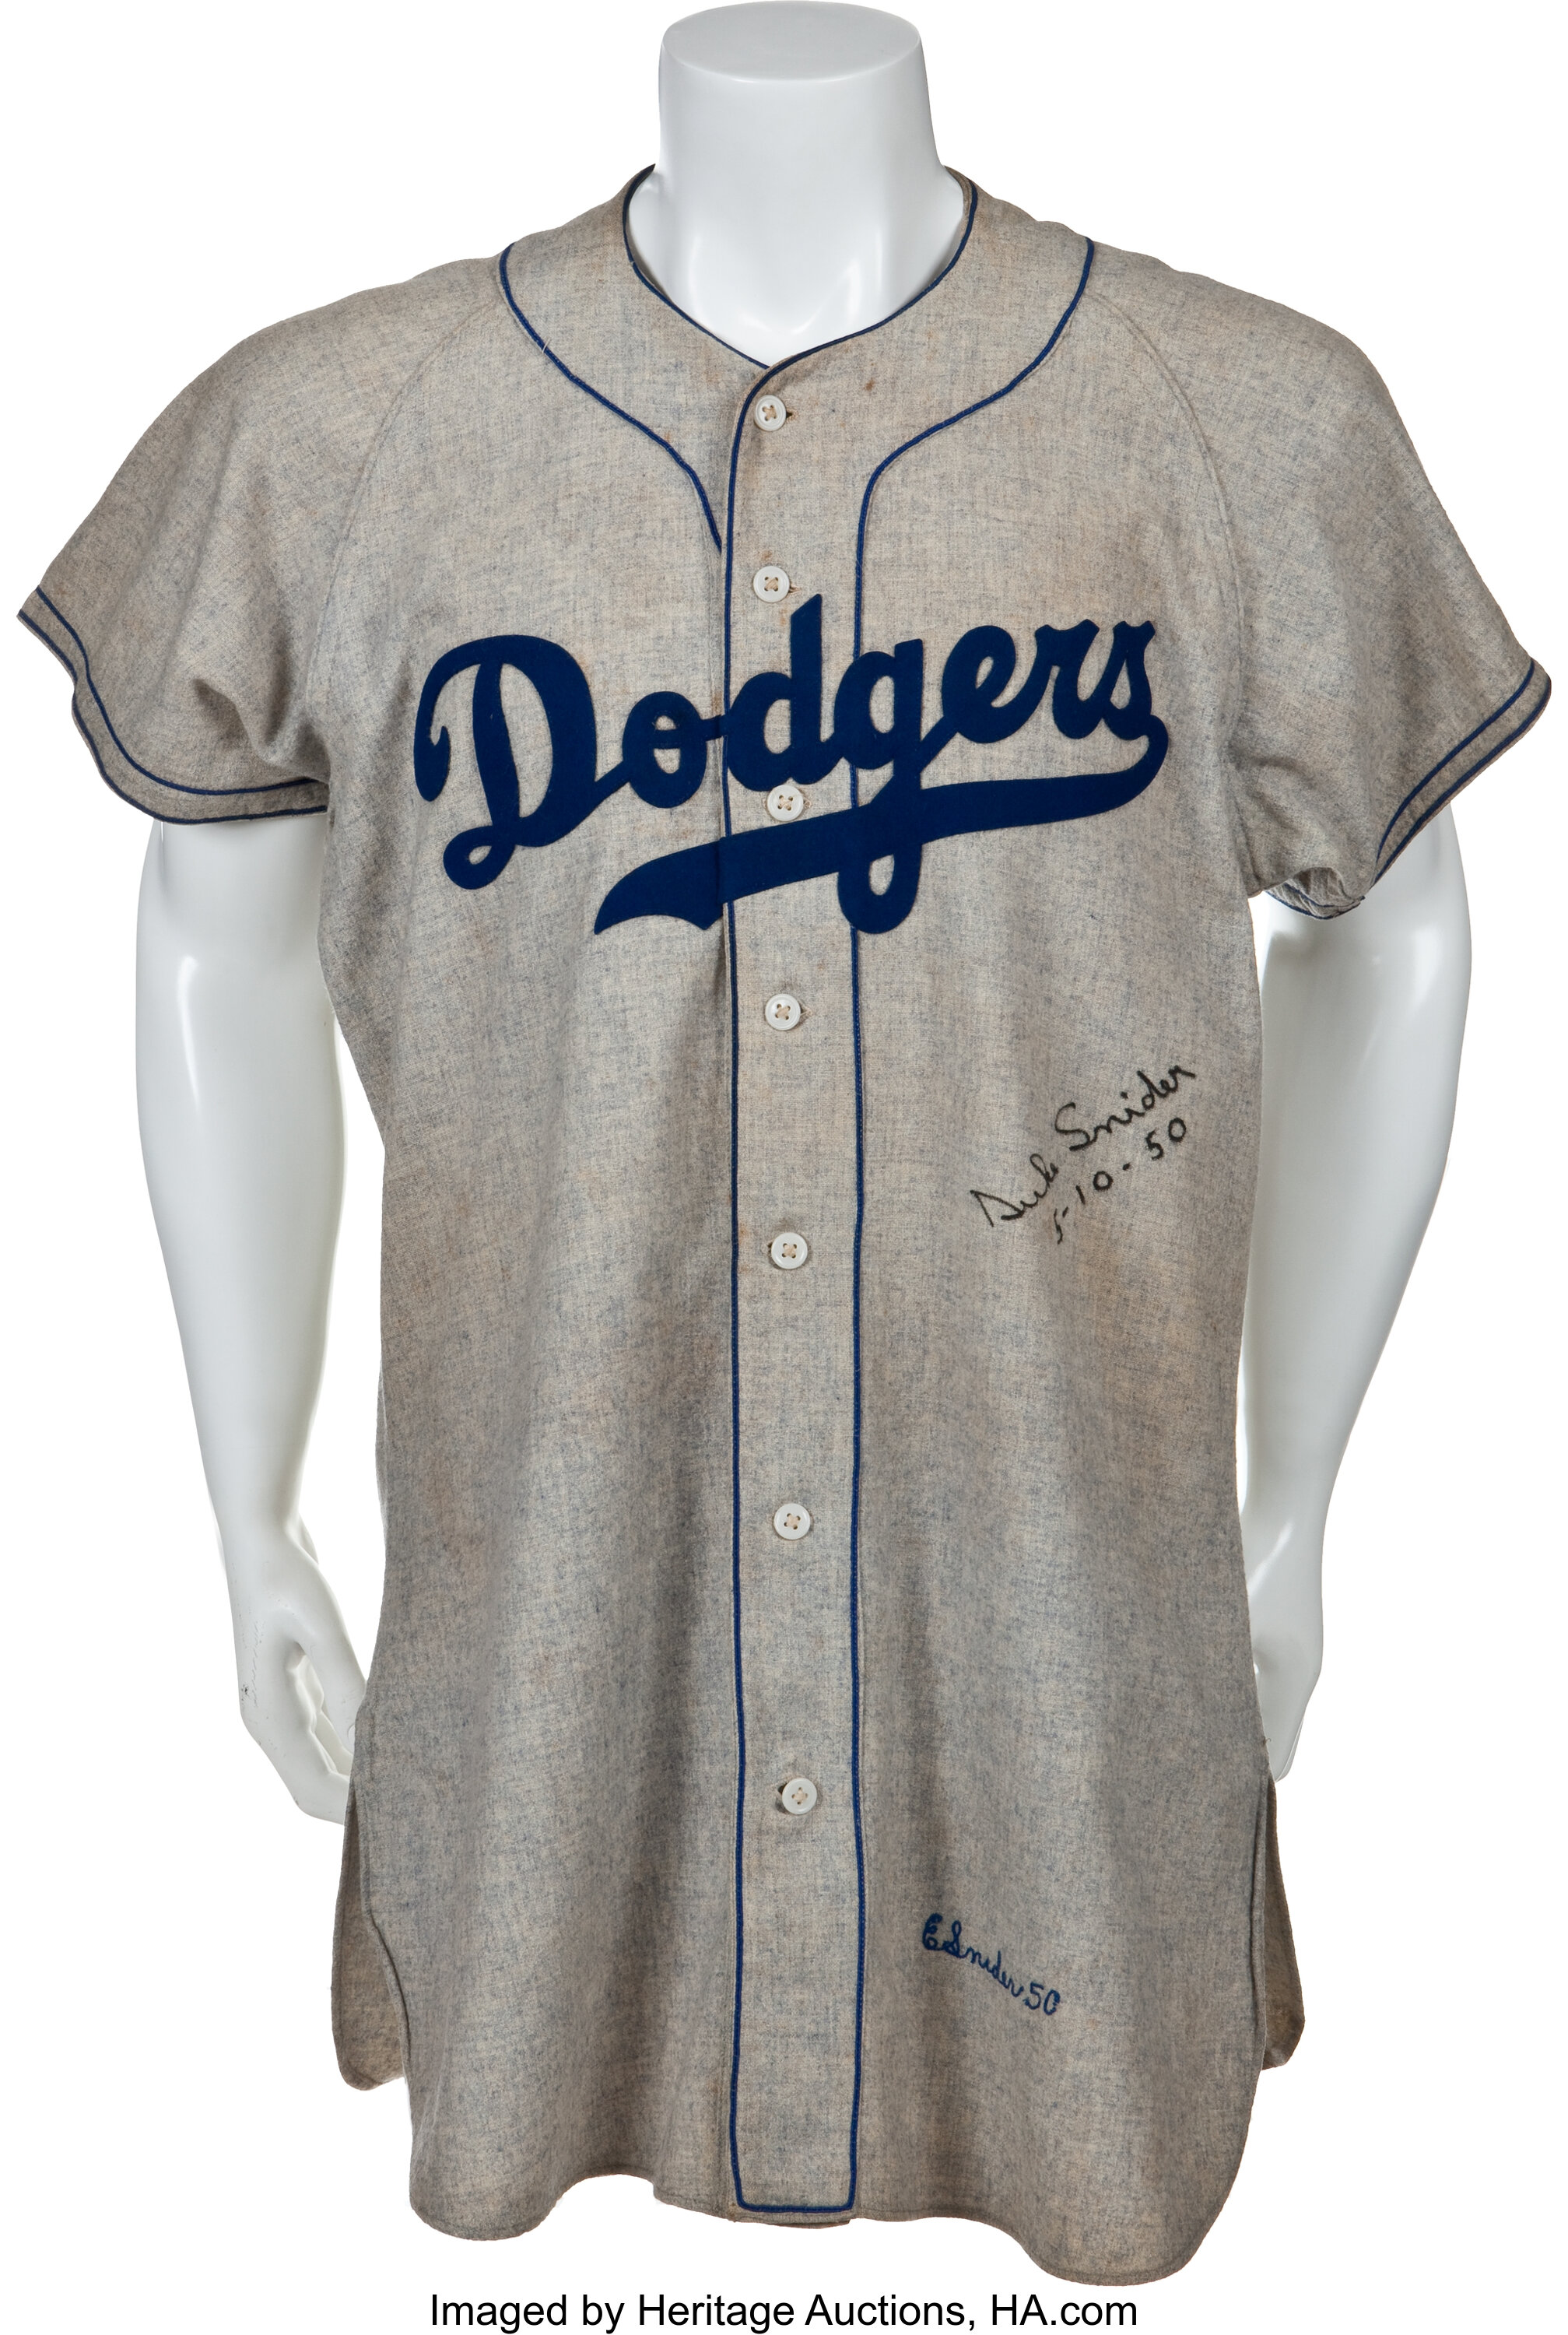 Authentic Vintage Mitchell & Ness Brooklyn Dodgers Duke Snider Baseball  Jersey